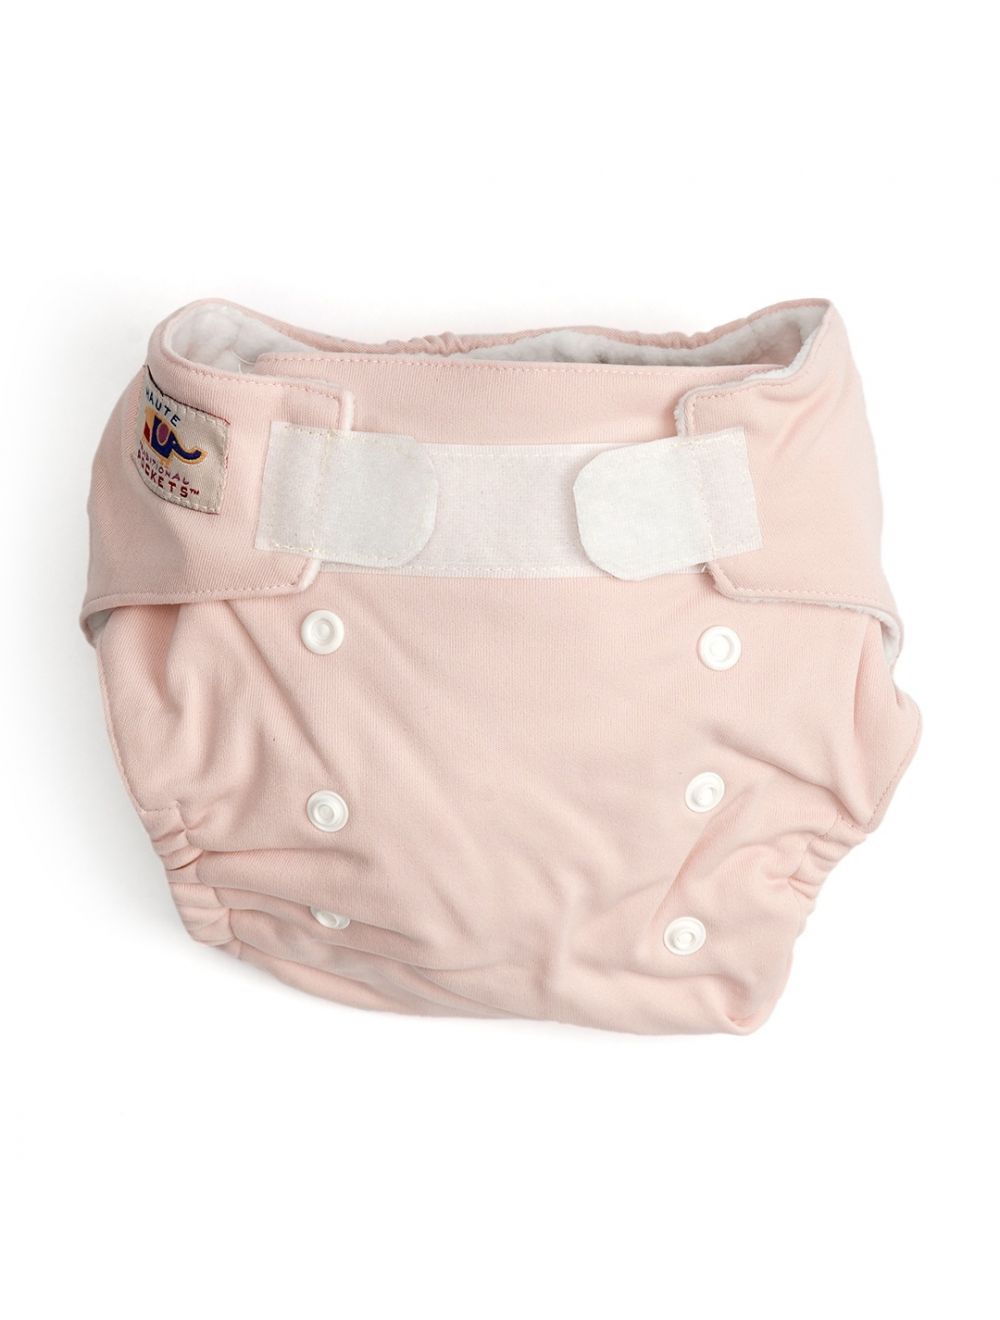 Cuby Baby Reusable Nappy Pink